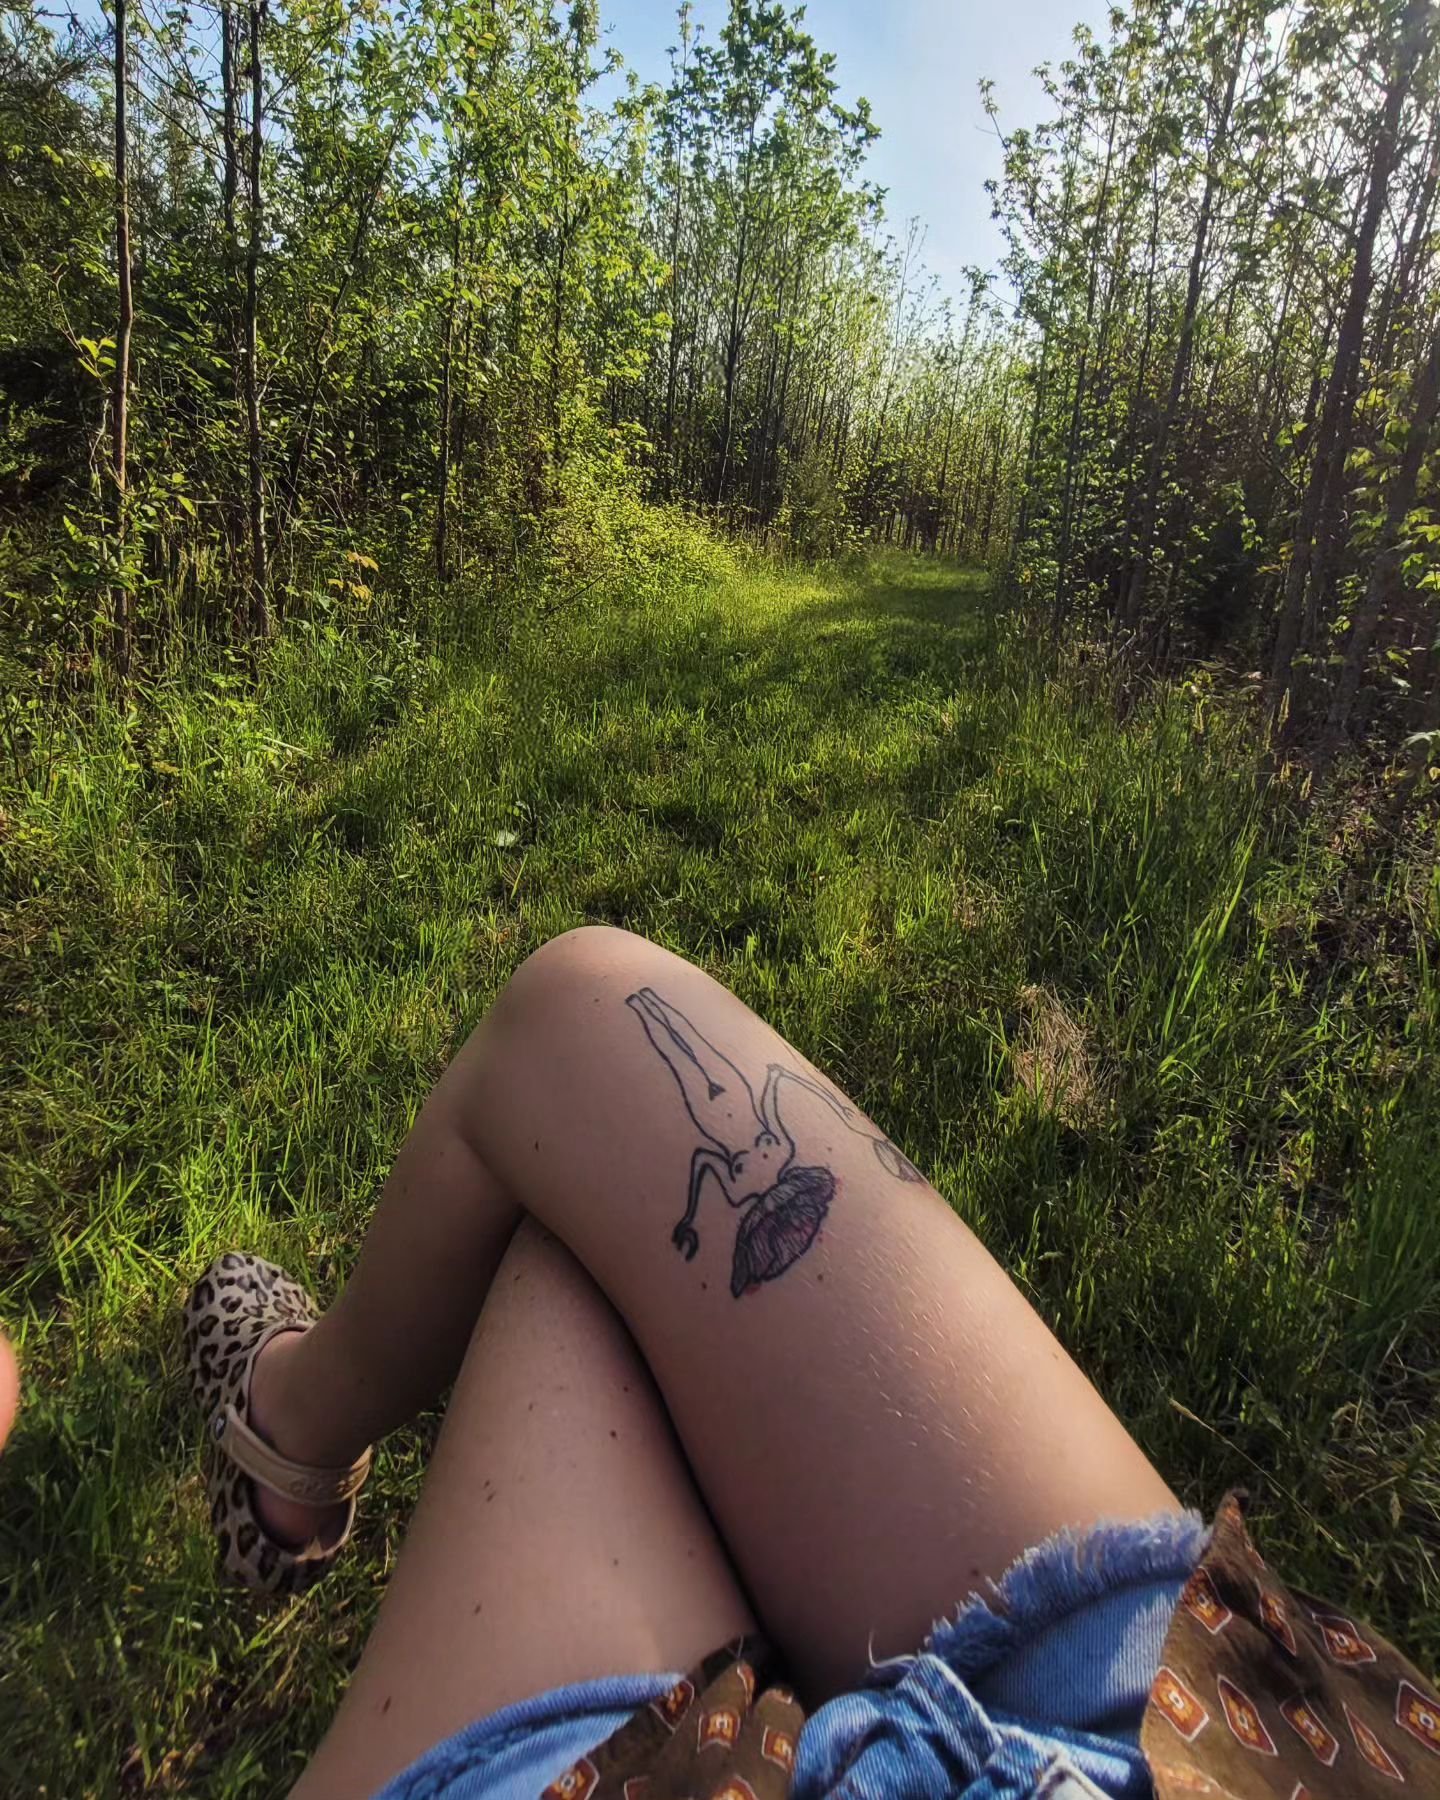 My favorite sit spot on the farm. I've been coming to this spot since January. I'm learning about this land and its inhabitants through the practice of being and observing. I love connecting to the cycles of the Earth through watching her seasons evo